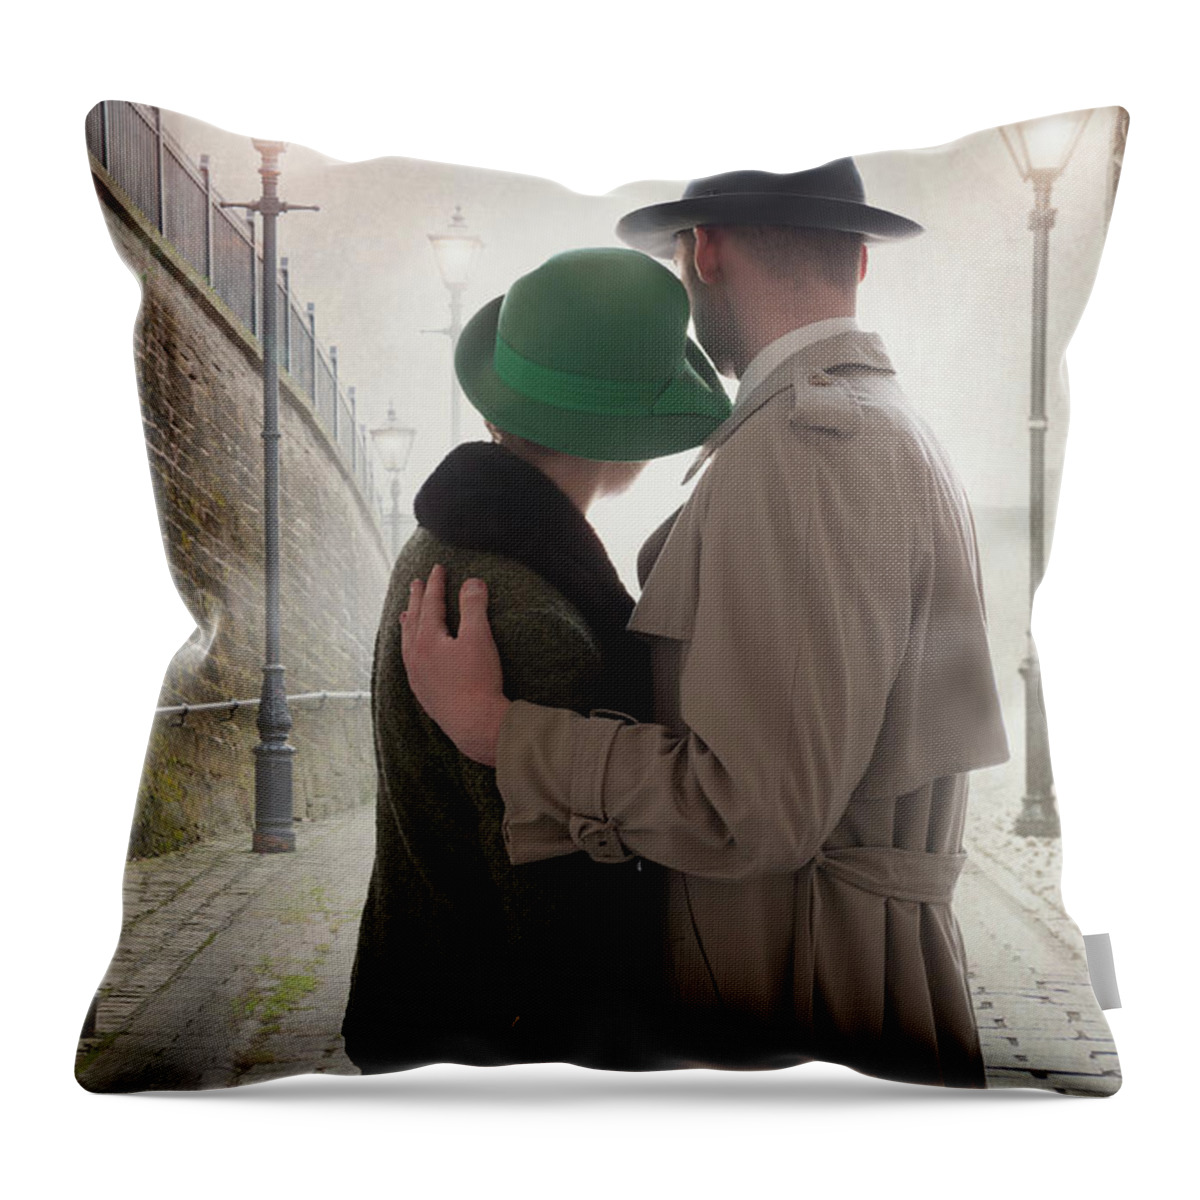 1940s Throw Pillow featuring the photograph 1940s Couple At Dusk by Lee Avison